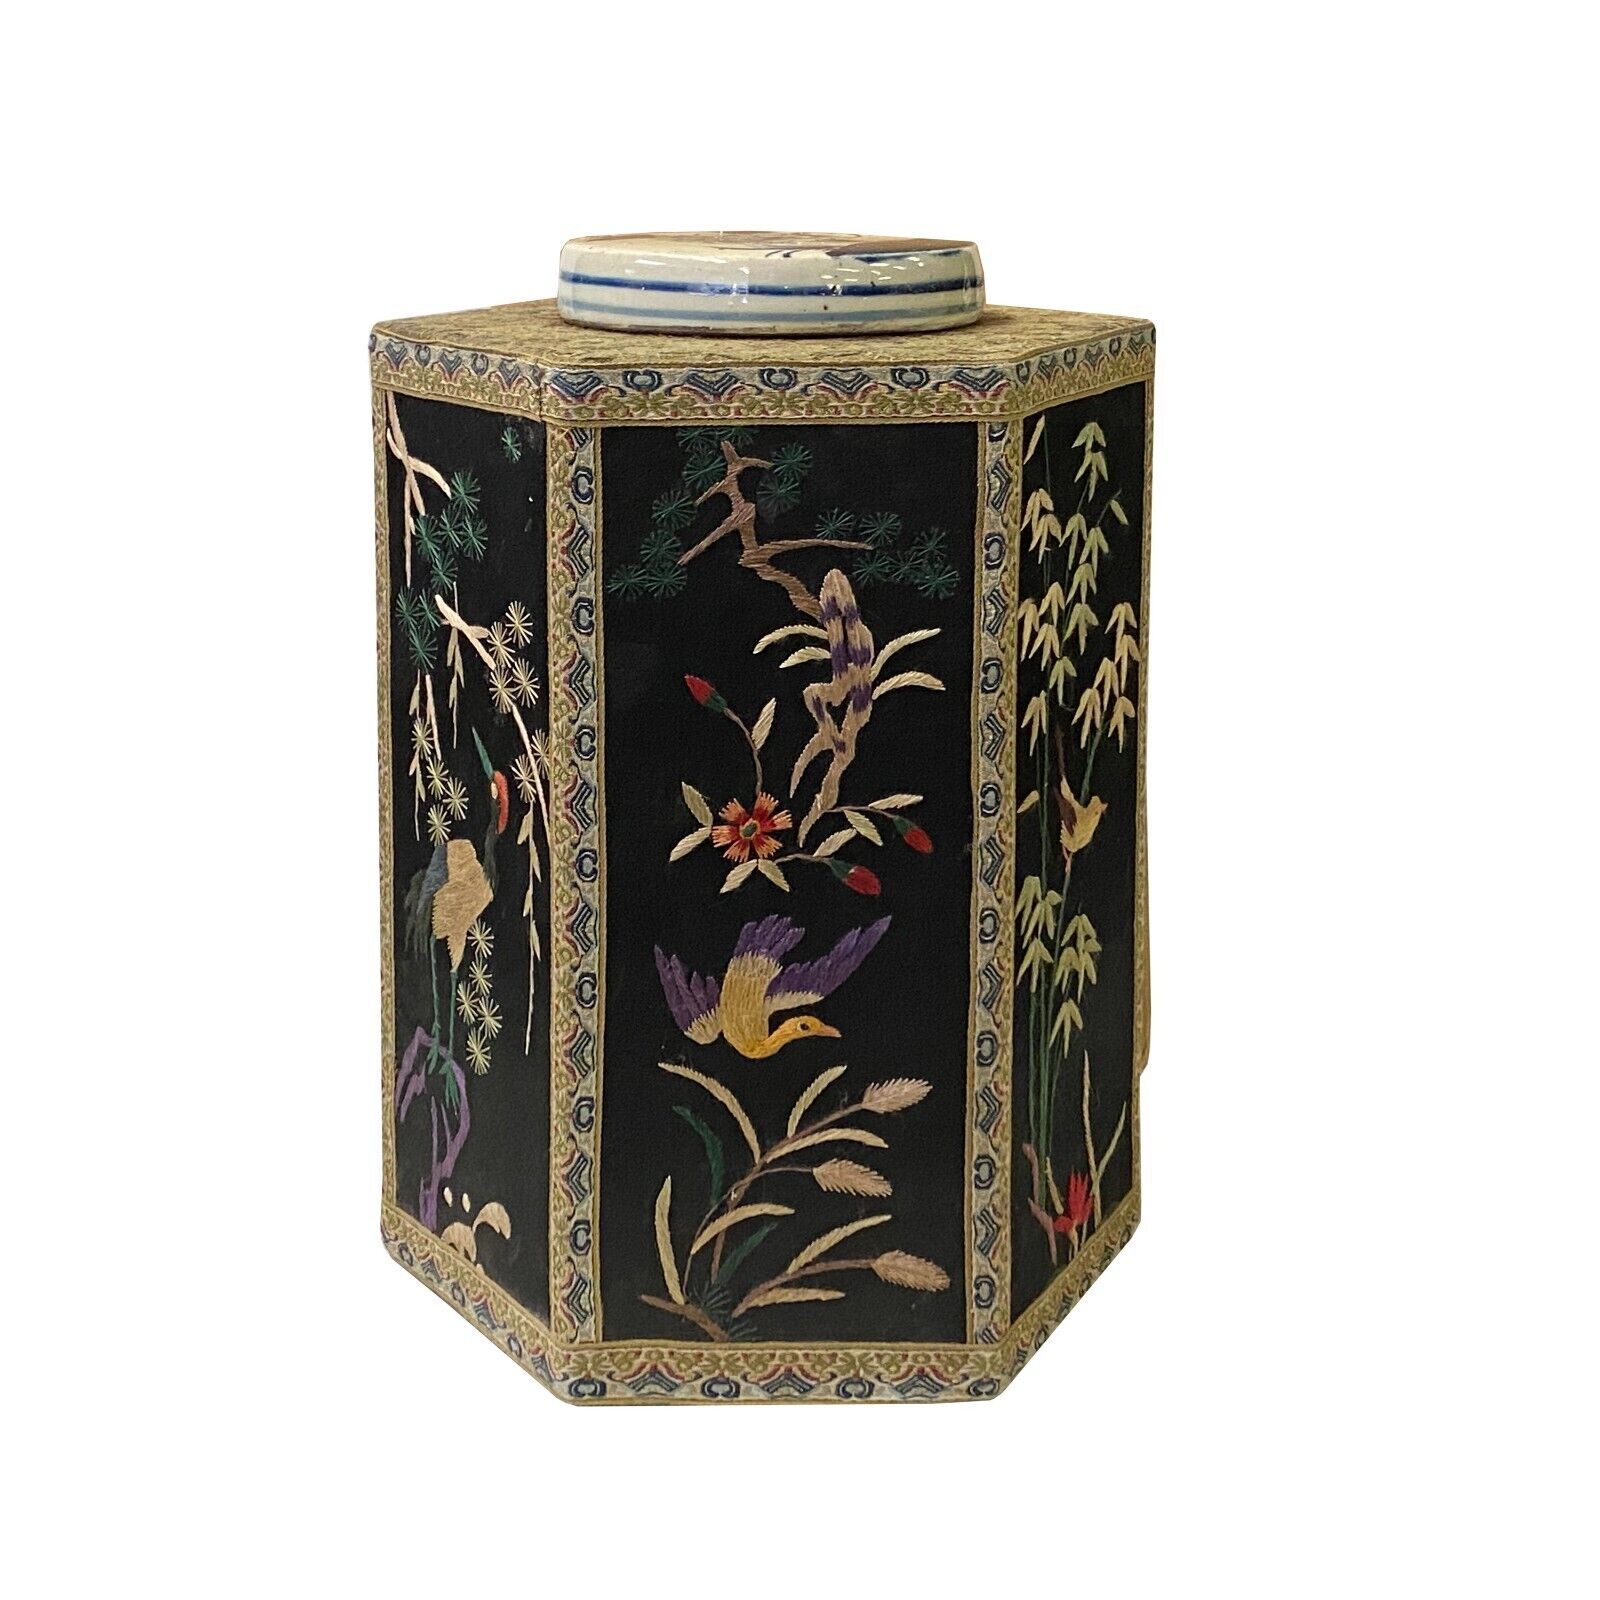 Chinese Black Hexagon Container Flower Birds Embroidery Porcelain Cover ws2659